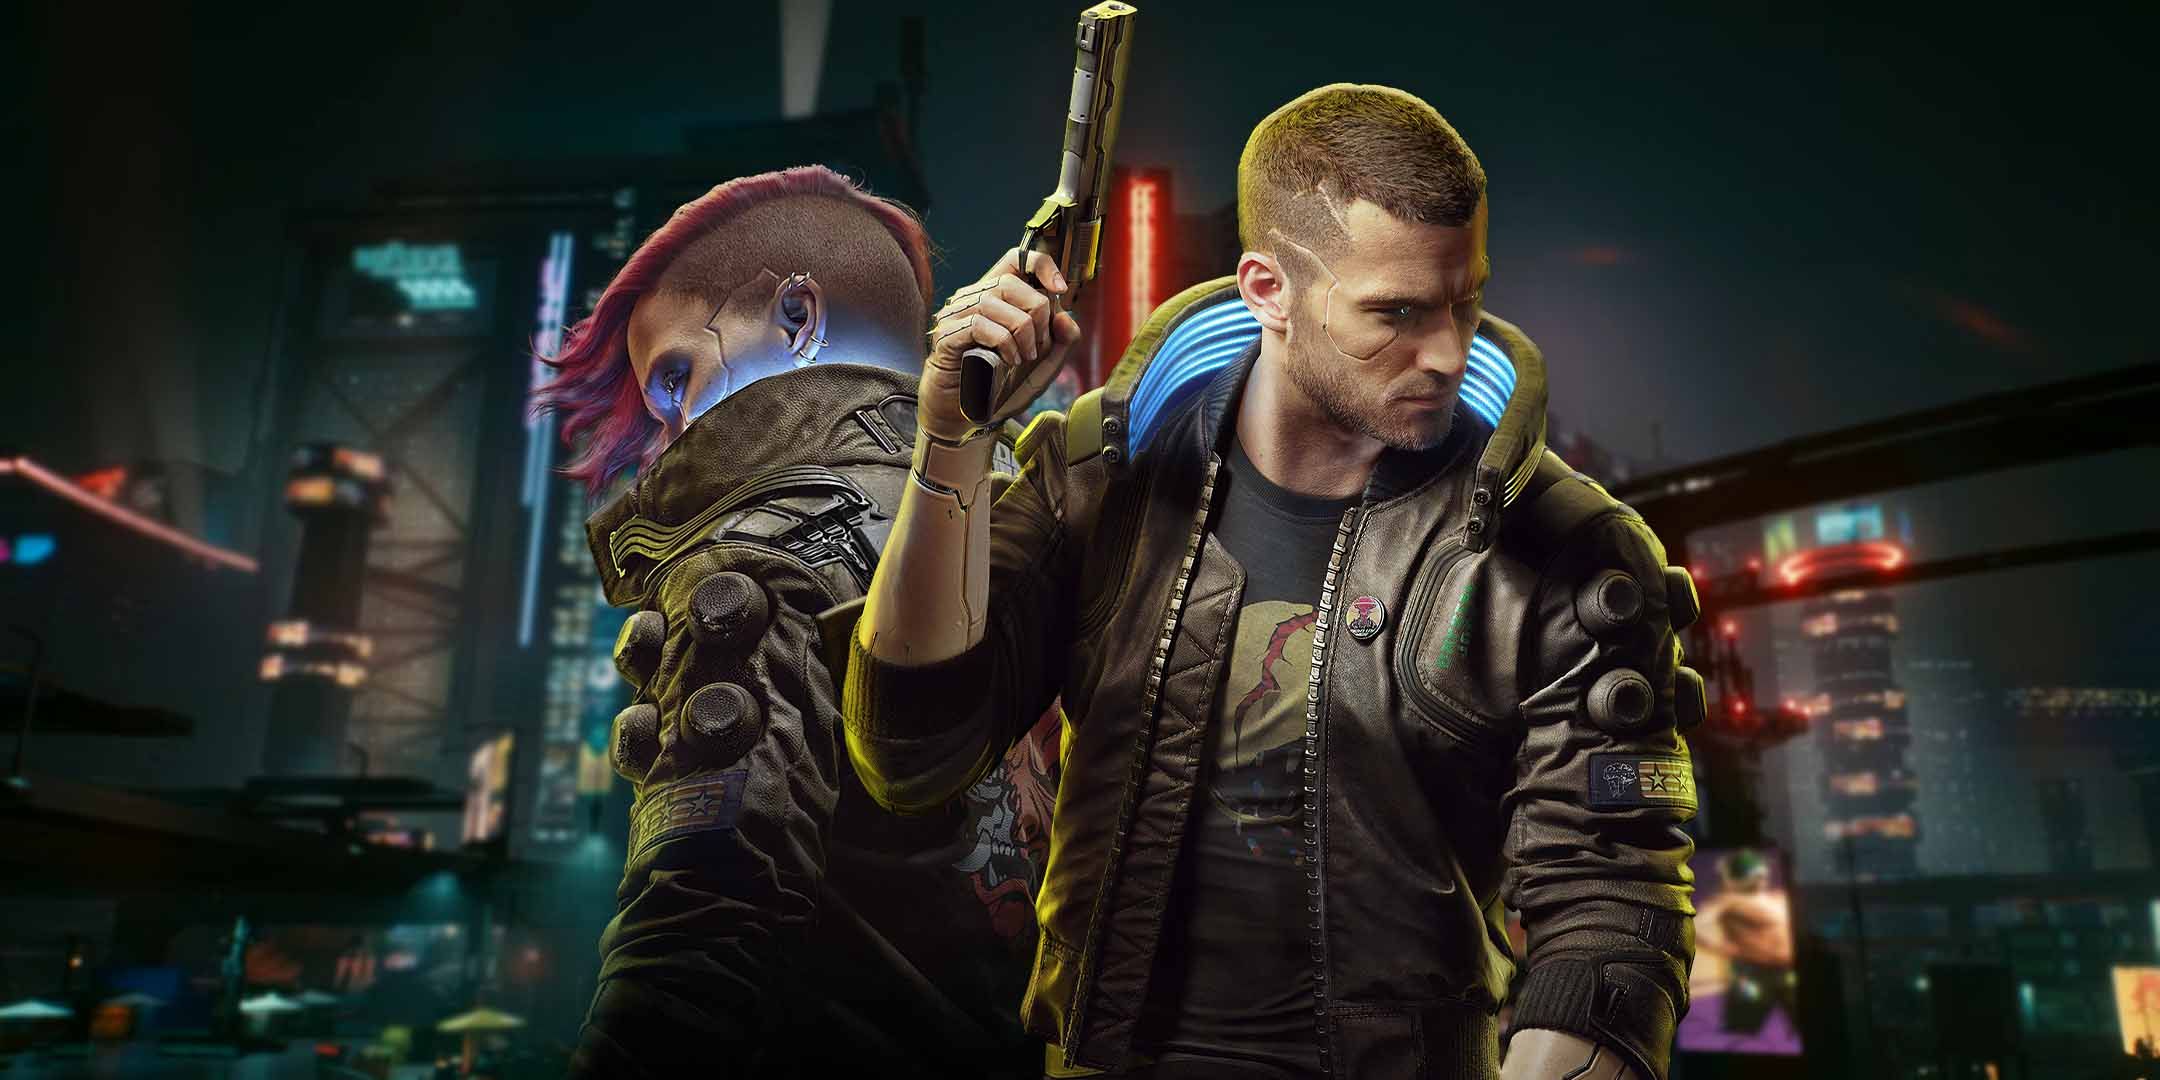 Male and Female V from Cyberpunk 2077 in Night City